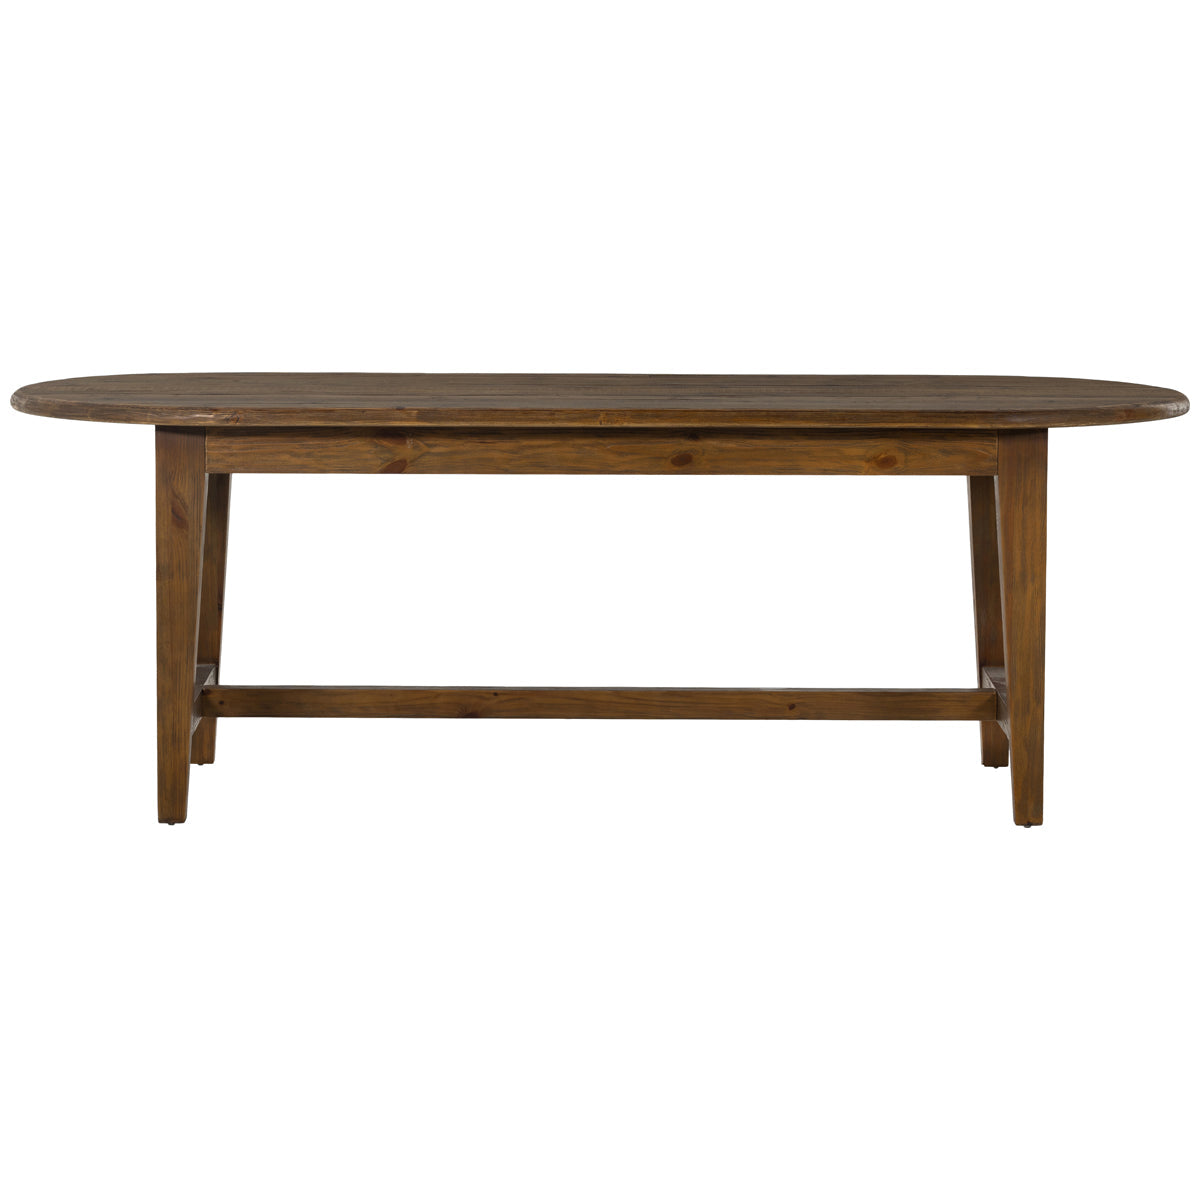 Four Hands Collins Alfie Dining Table